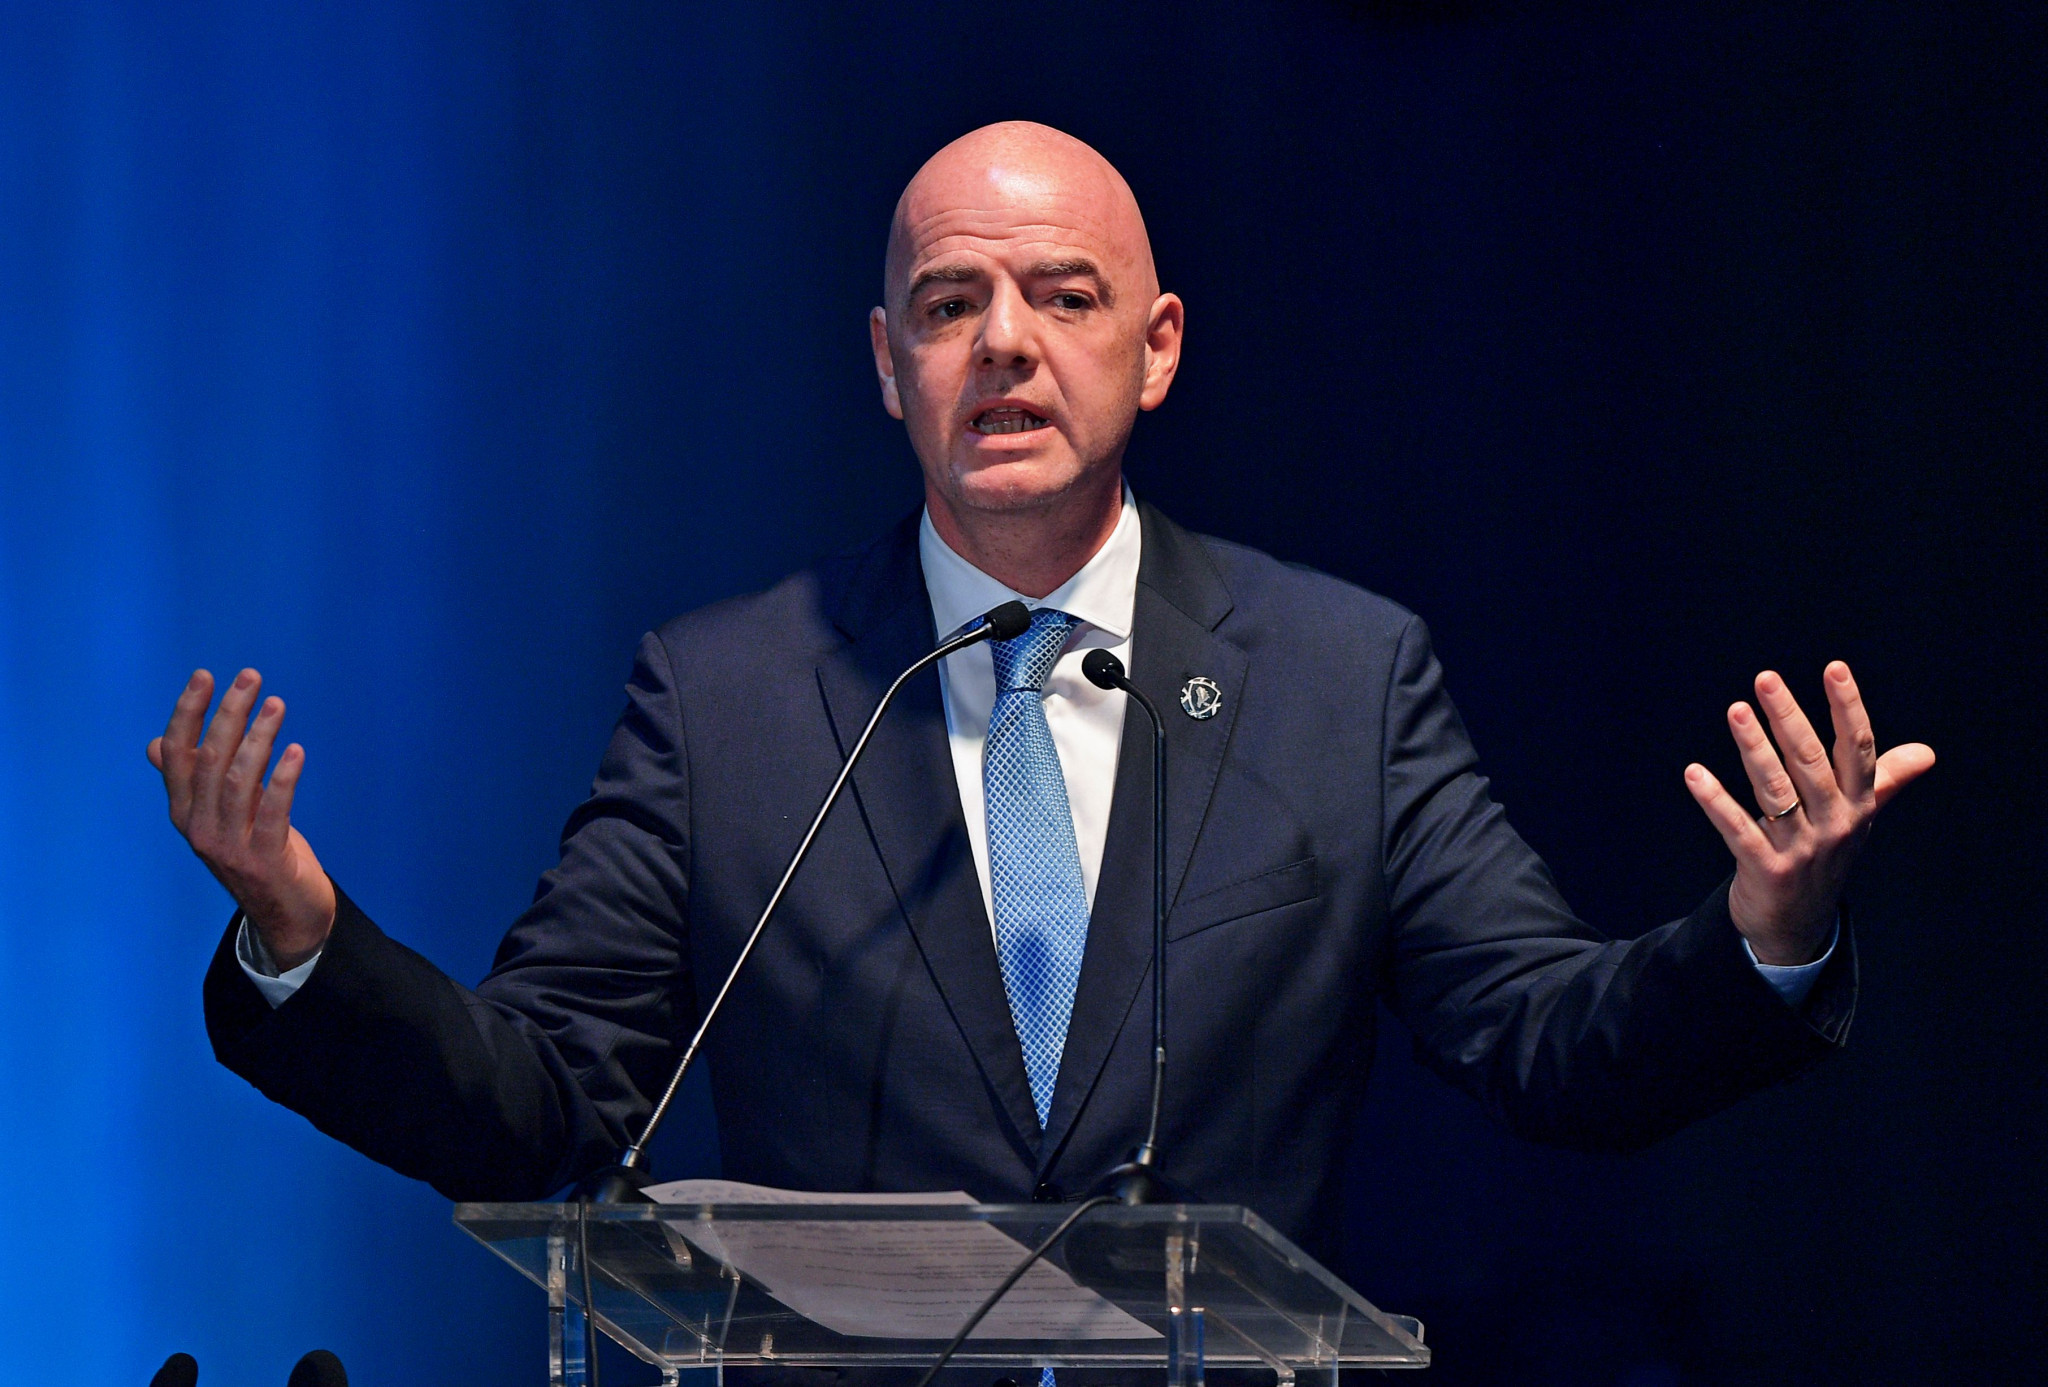 FIFA President Infantino vows to continue fight against racism after Amiens captain Gouano receives reported abuse